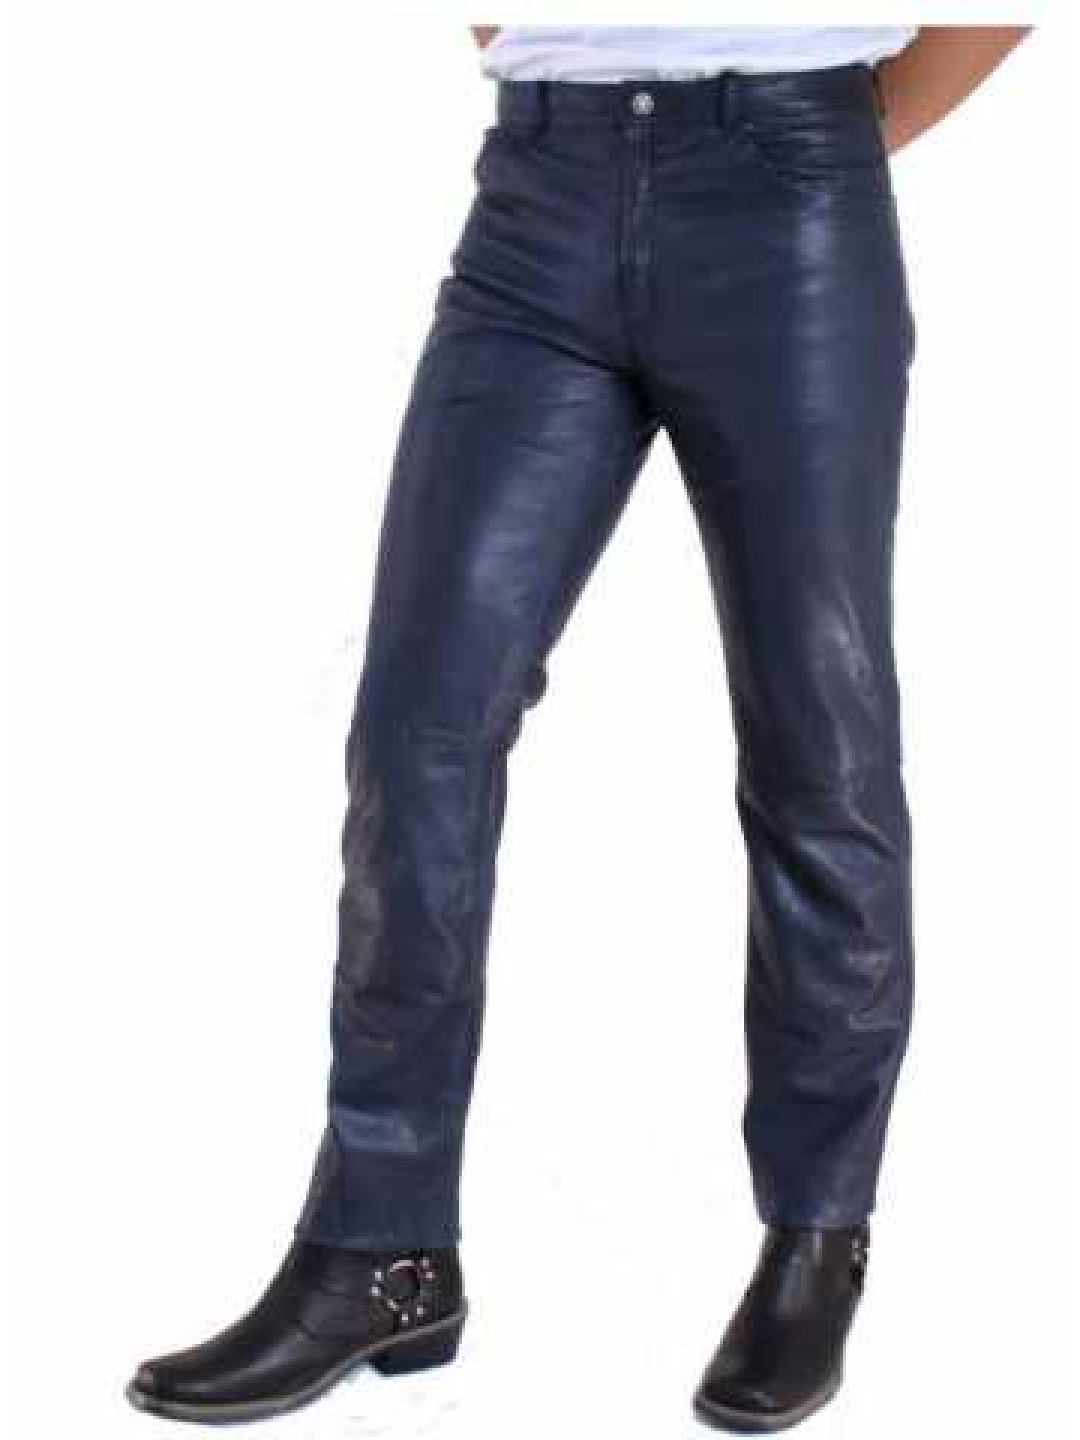 blckbllthr  Leather pants women Leather outfit Leather fashion